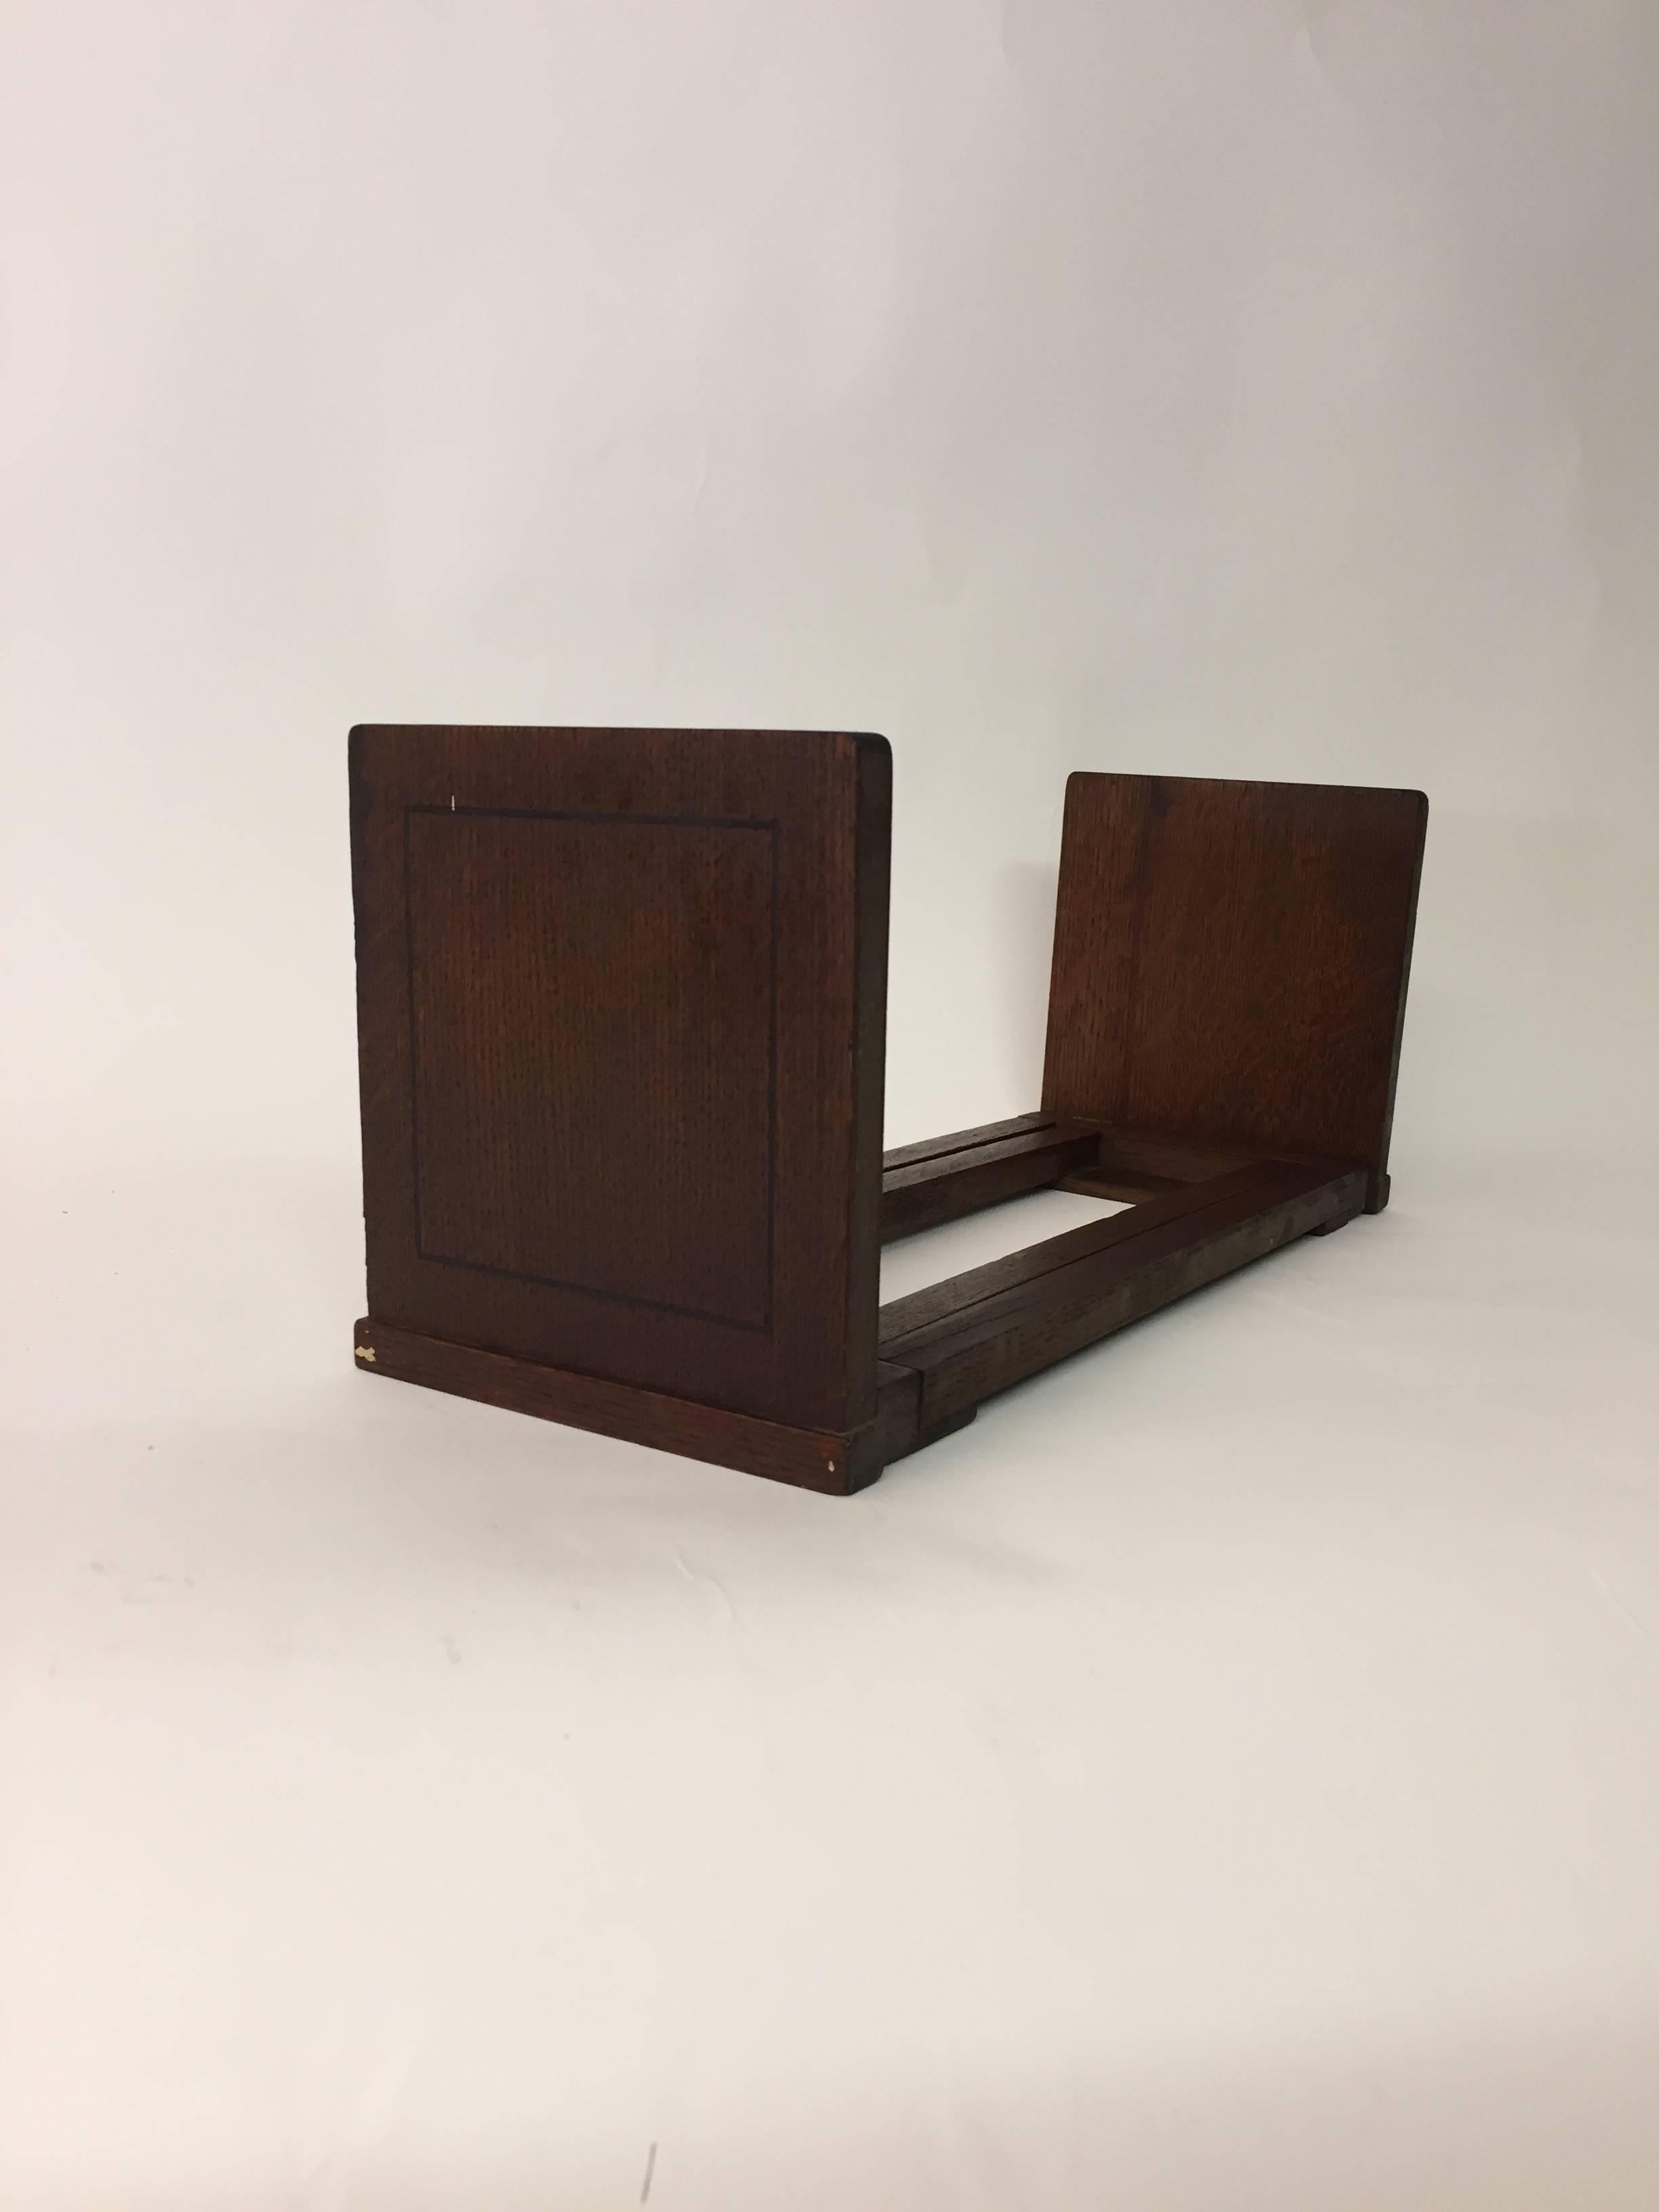 Portable Arts & Crafts book stand that expands and contracts. Ebony string inlay detail on each oak panel. Great original dark patina. Its expanded opening is 27.5